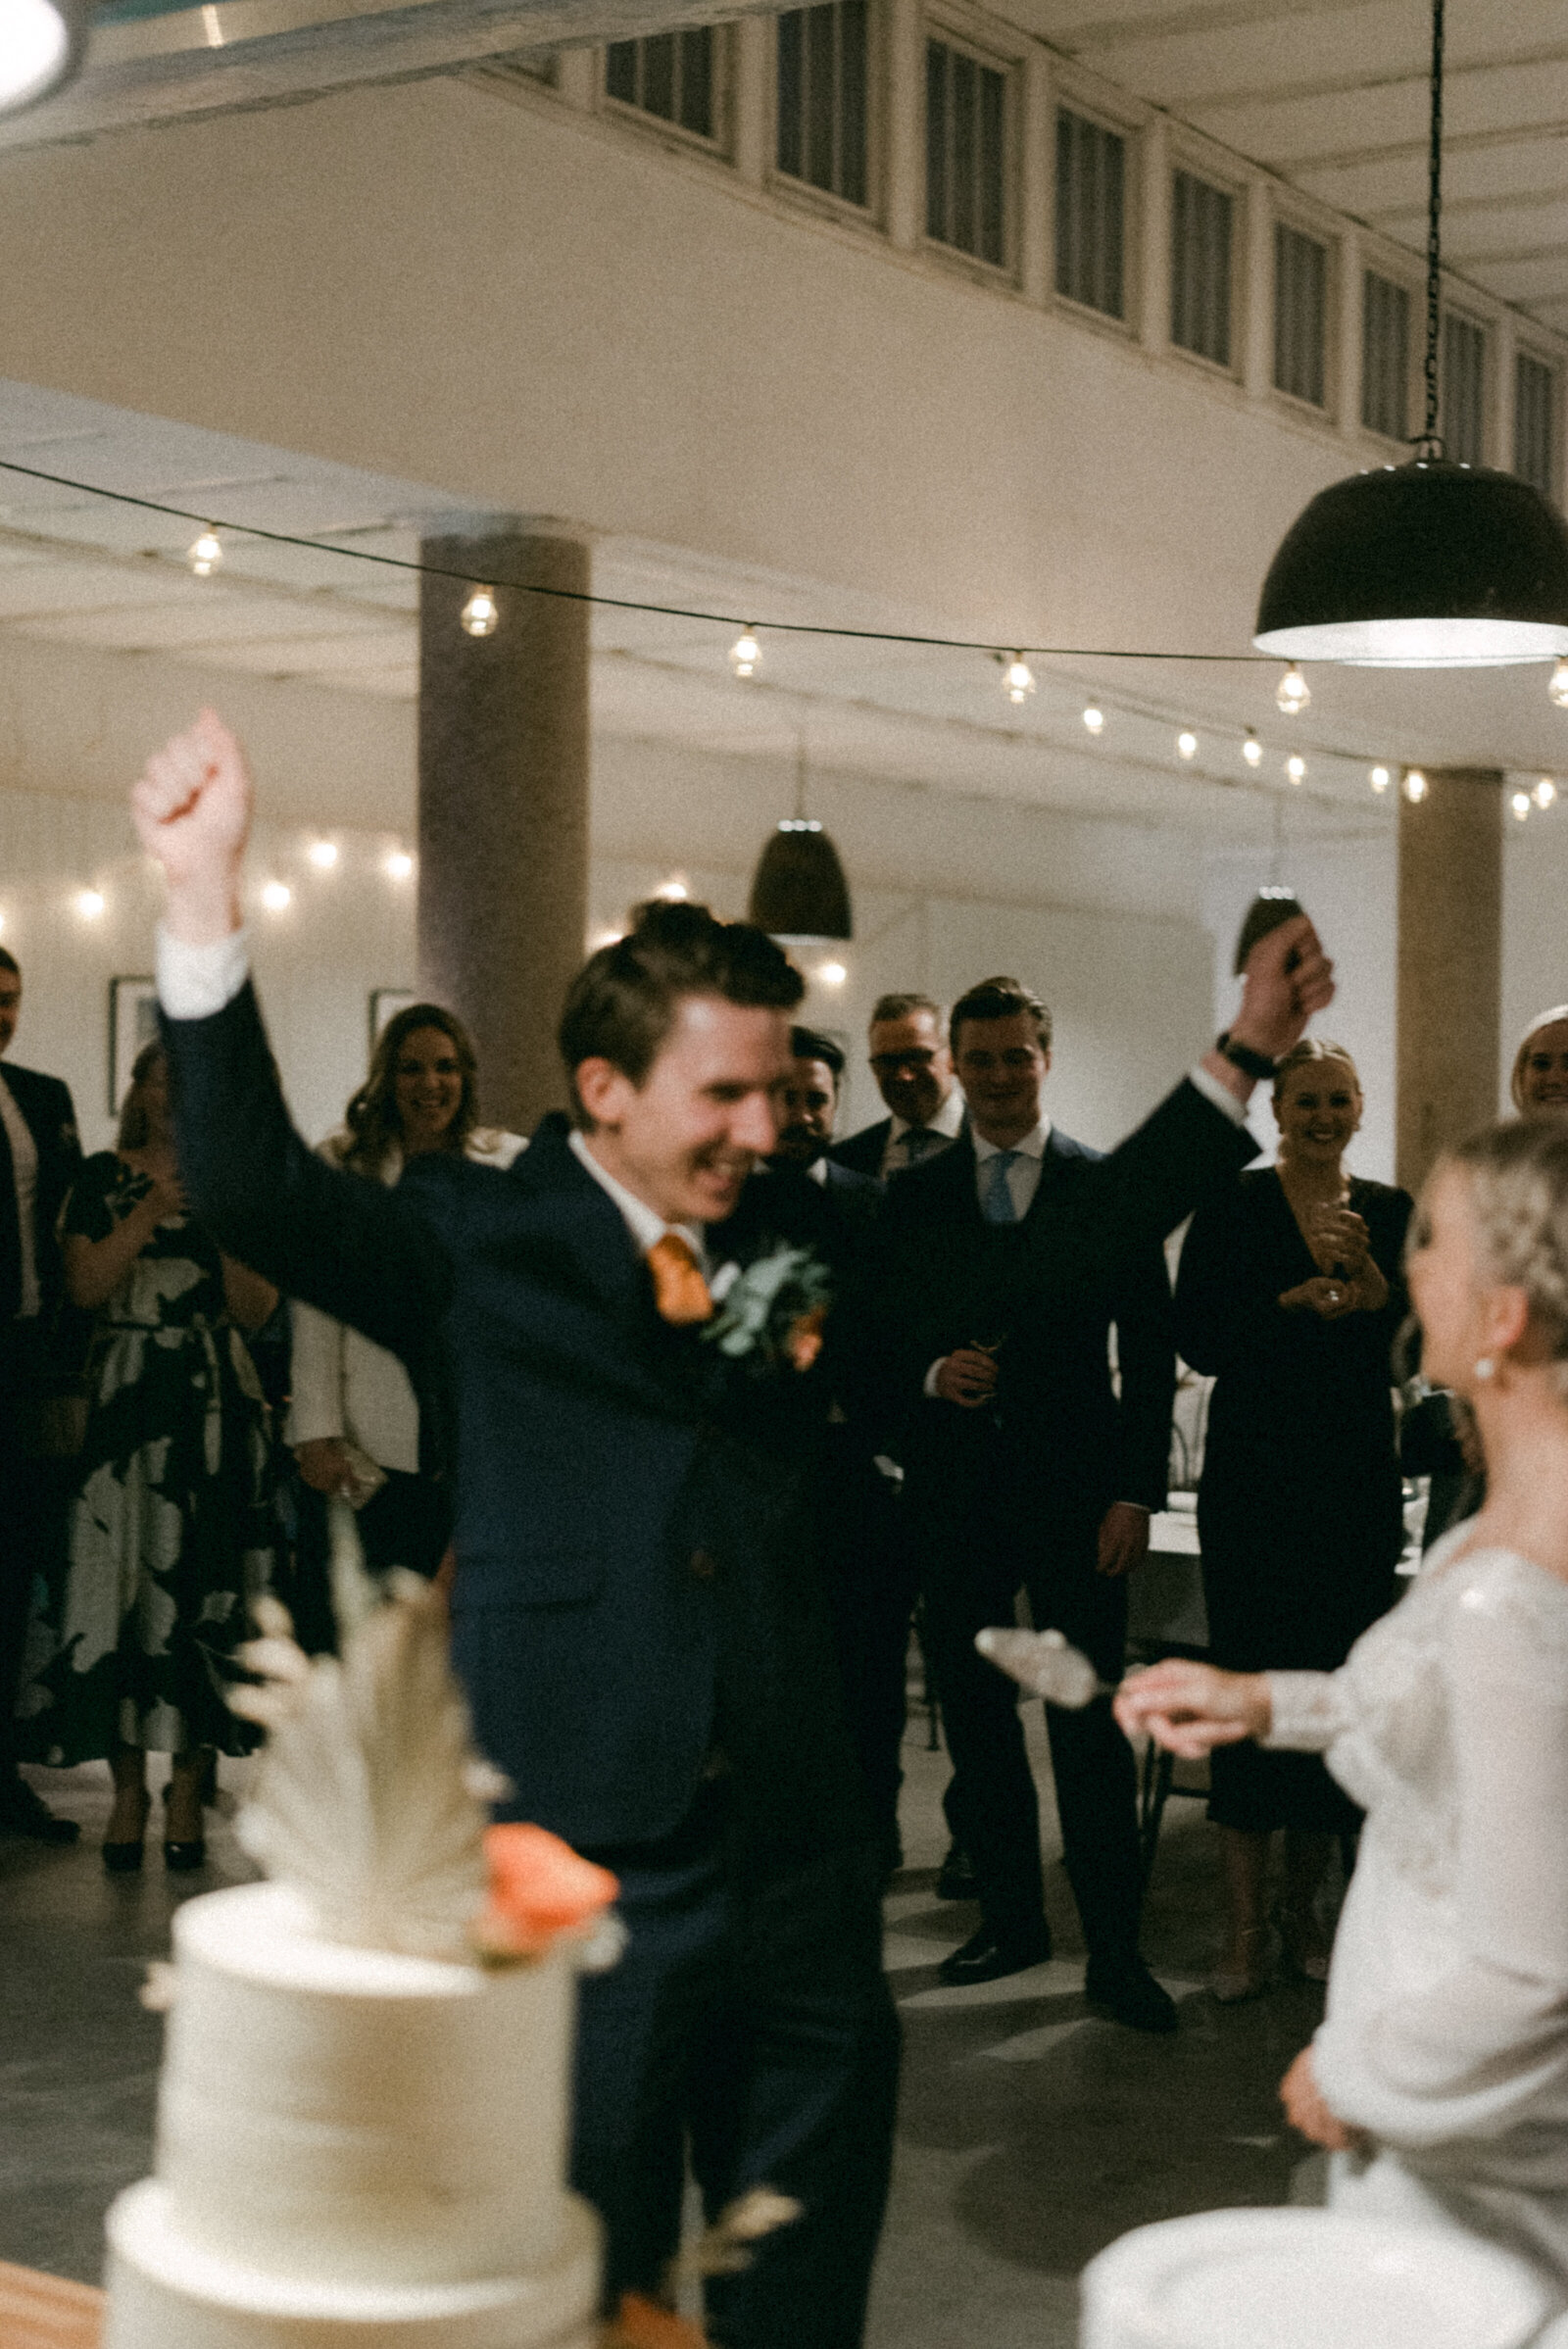 A documentary wedding  photo of the couple cutting the cake in Oitbacka gård captured by wedding photographer Hannika Gabrielsson in Finland